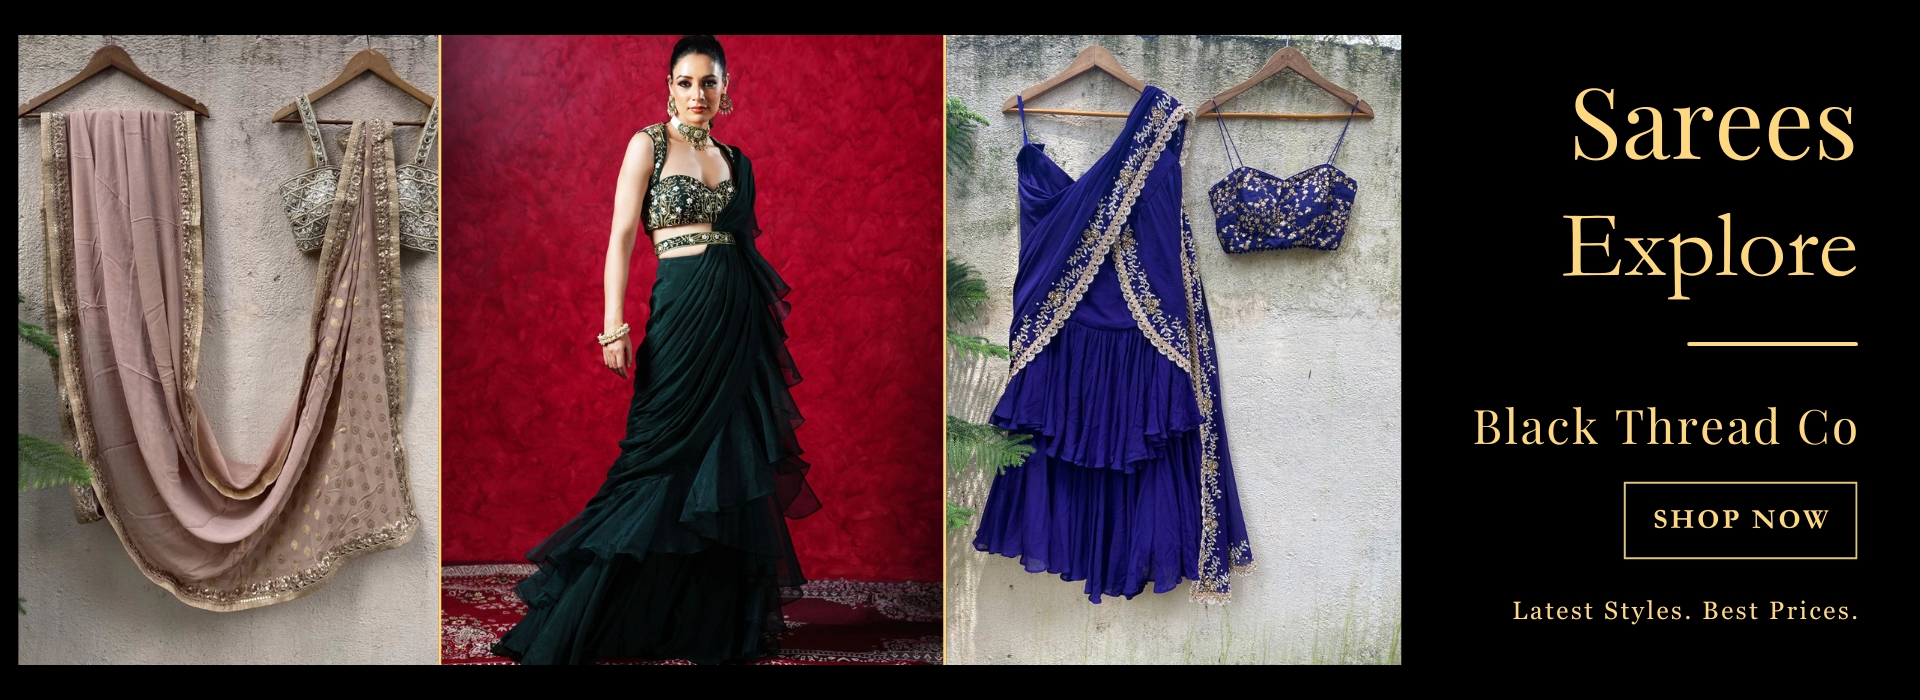 Sarees by Top Indian Brands - Black Thread Co UK